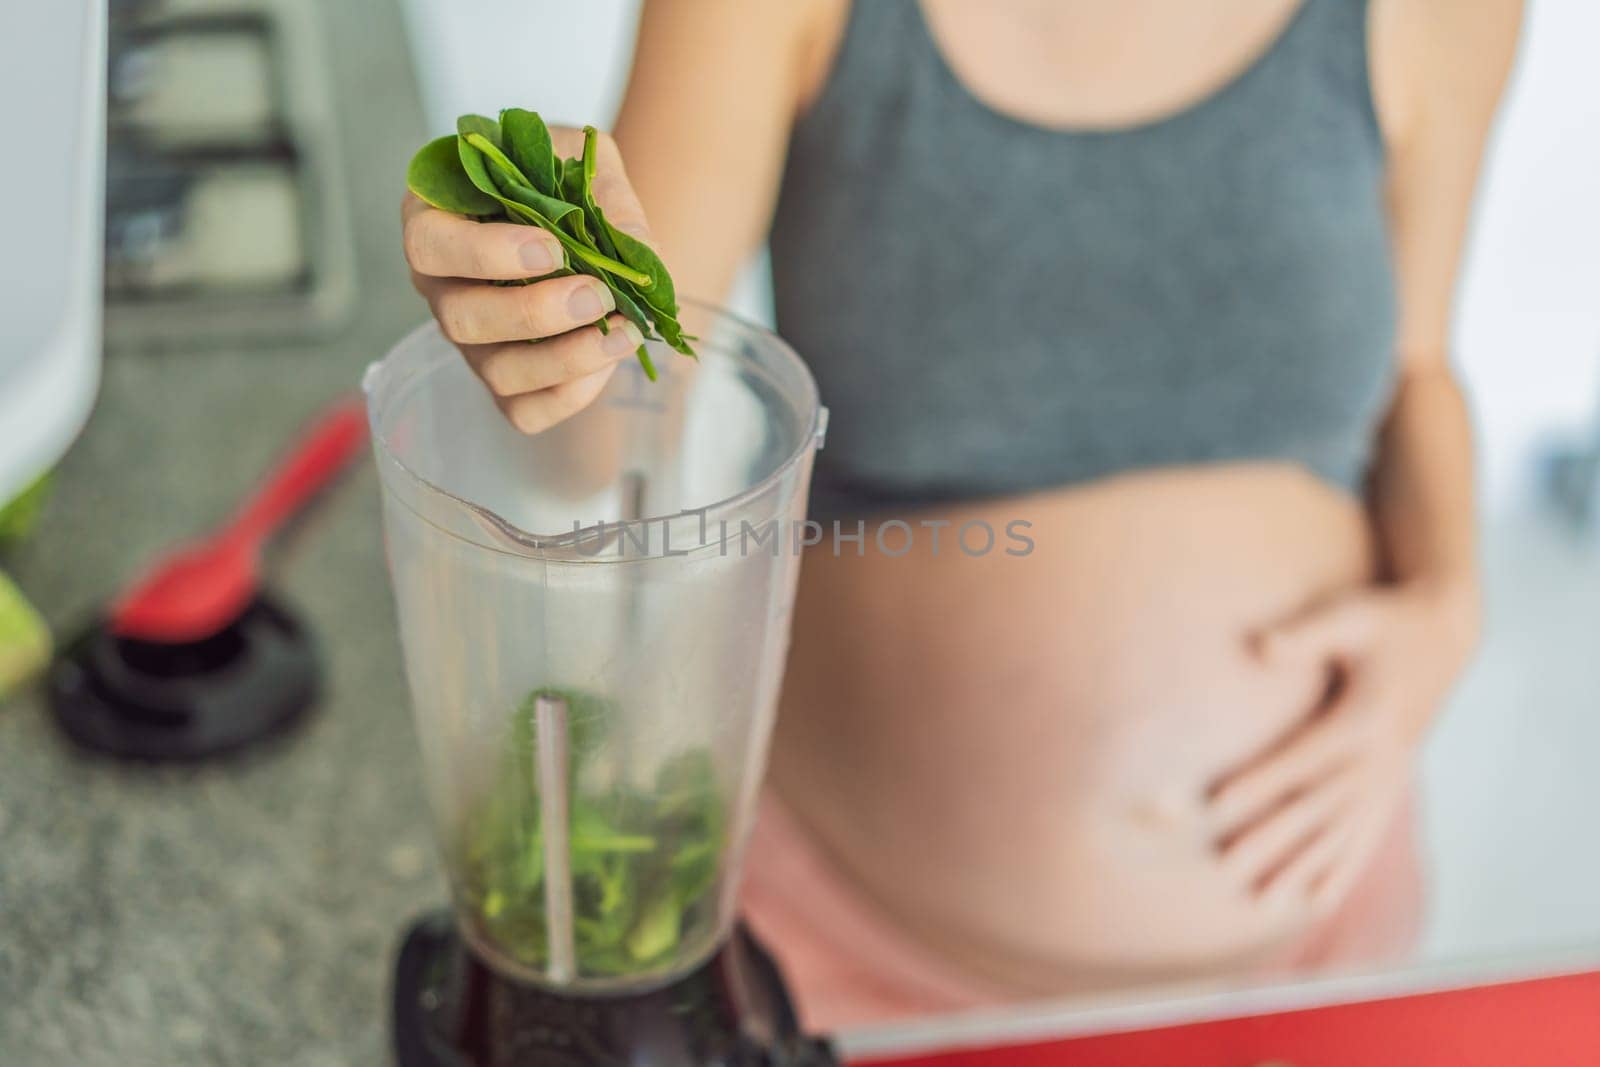 Embracing a nutritious choice, a pregnant woman joyfully prepares a vibrant vegetable smoothie, prioritizing wholesome ingredients for optimal well-being during her maternity journey by galitskaya